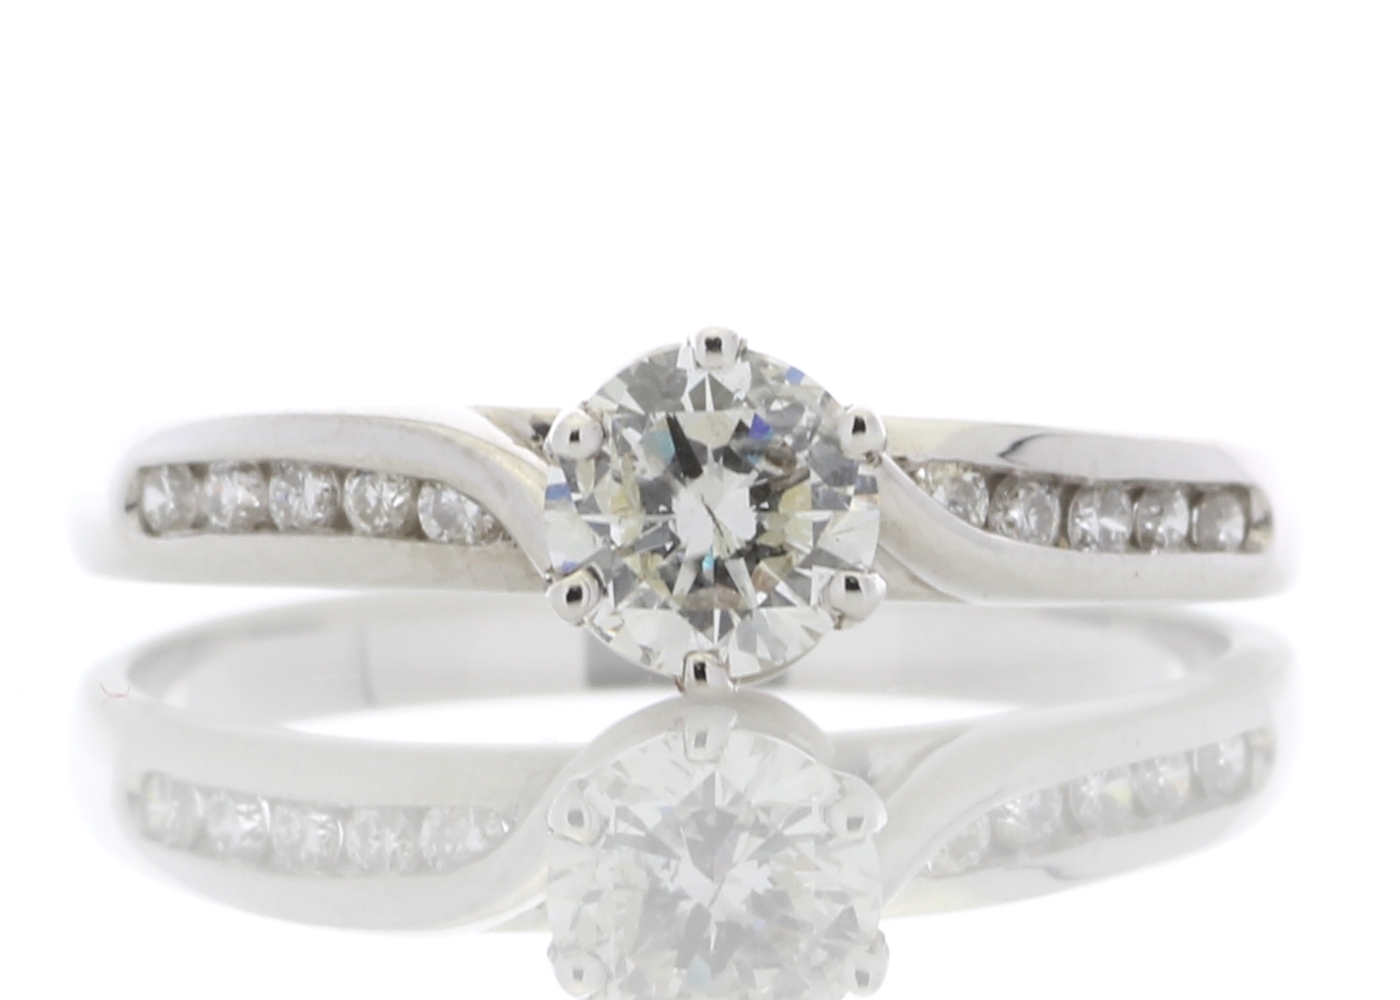 18ct White Gold Single Stone Diamond Ring With Stone Set Shoulders (0.51) 0.61 Carats - Image 2 of 6